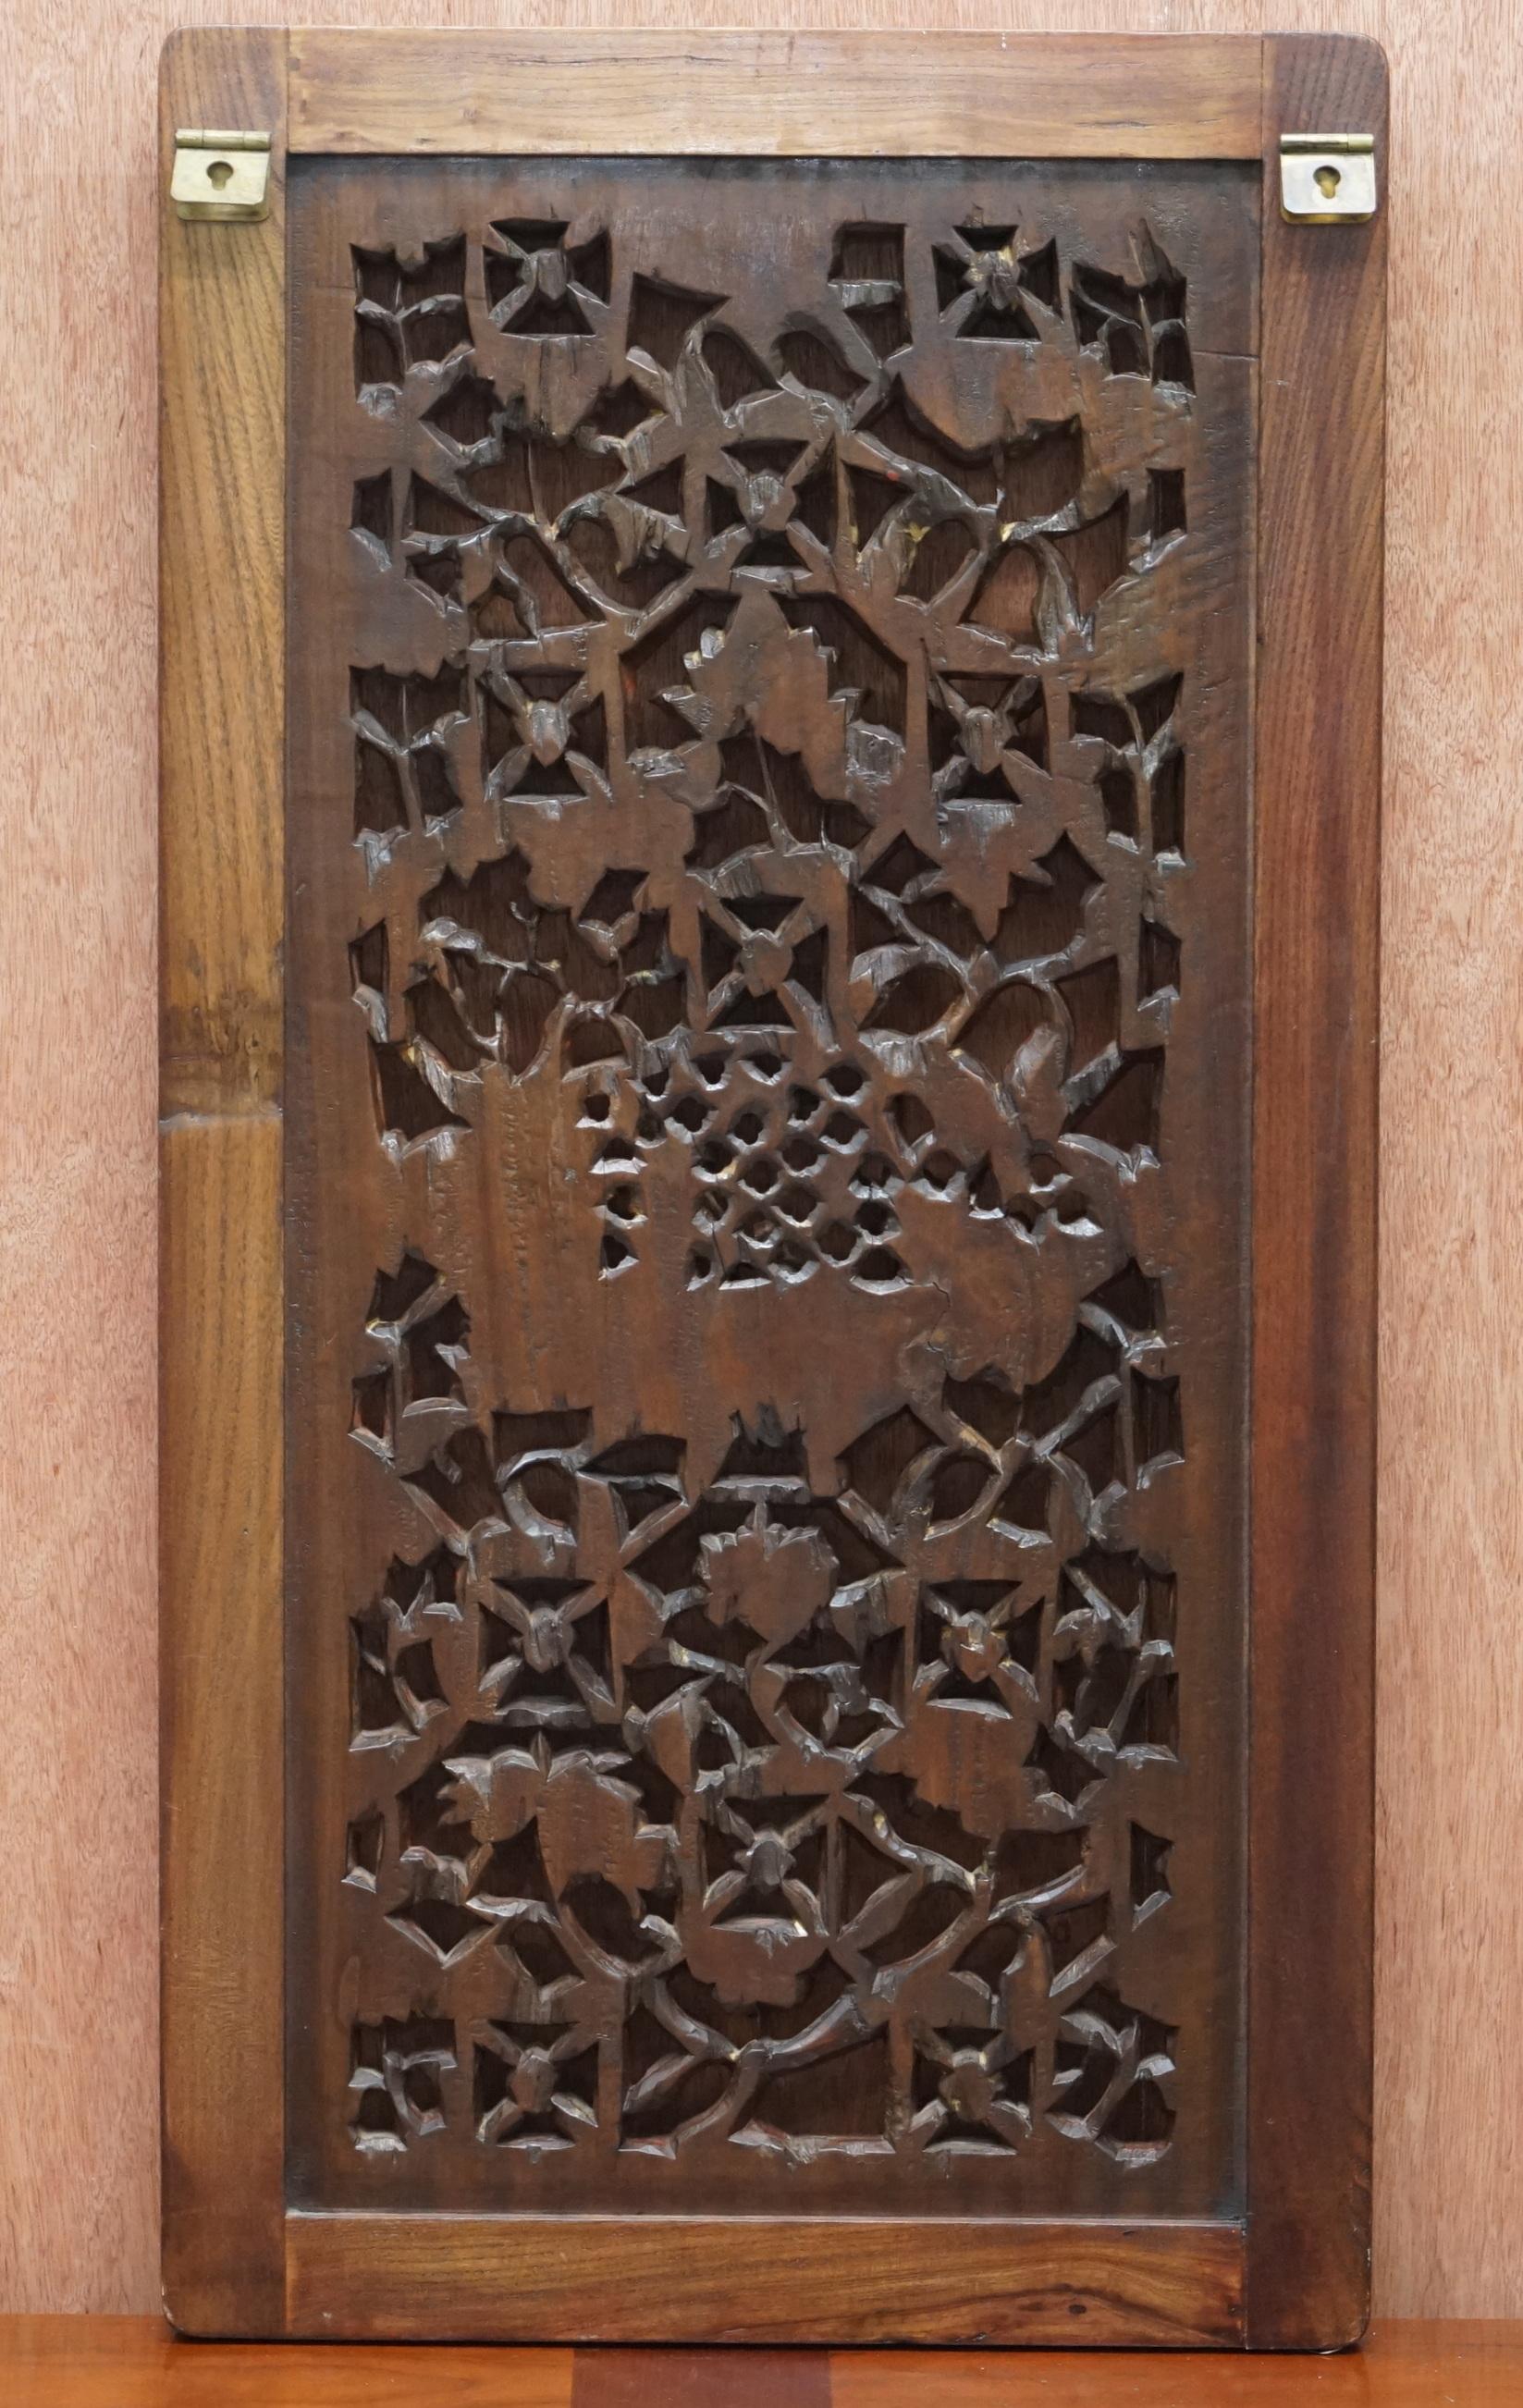 Chinese Export circa 1900 Gold Leaf Painted Fret Work Carved Wall Panel in Teak For Sale 5